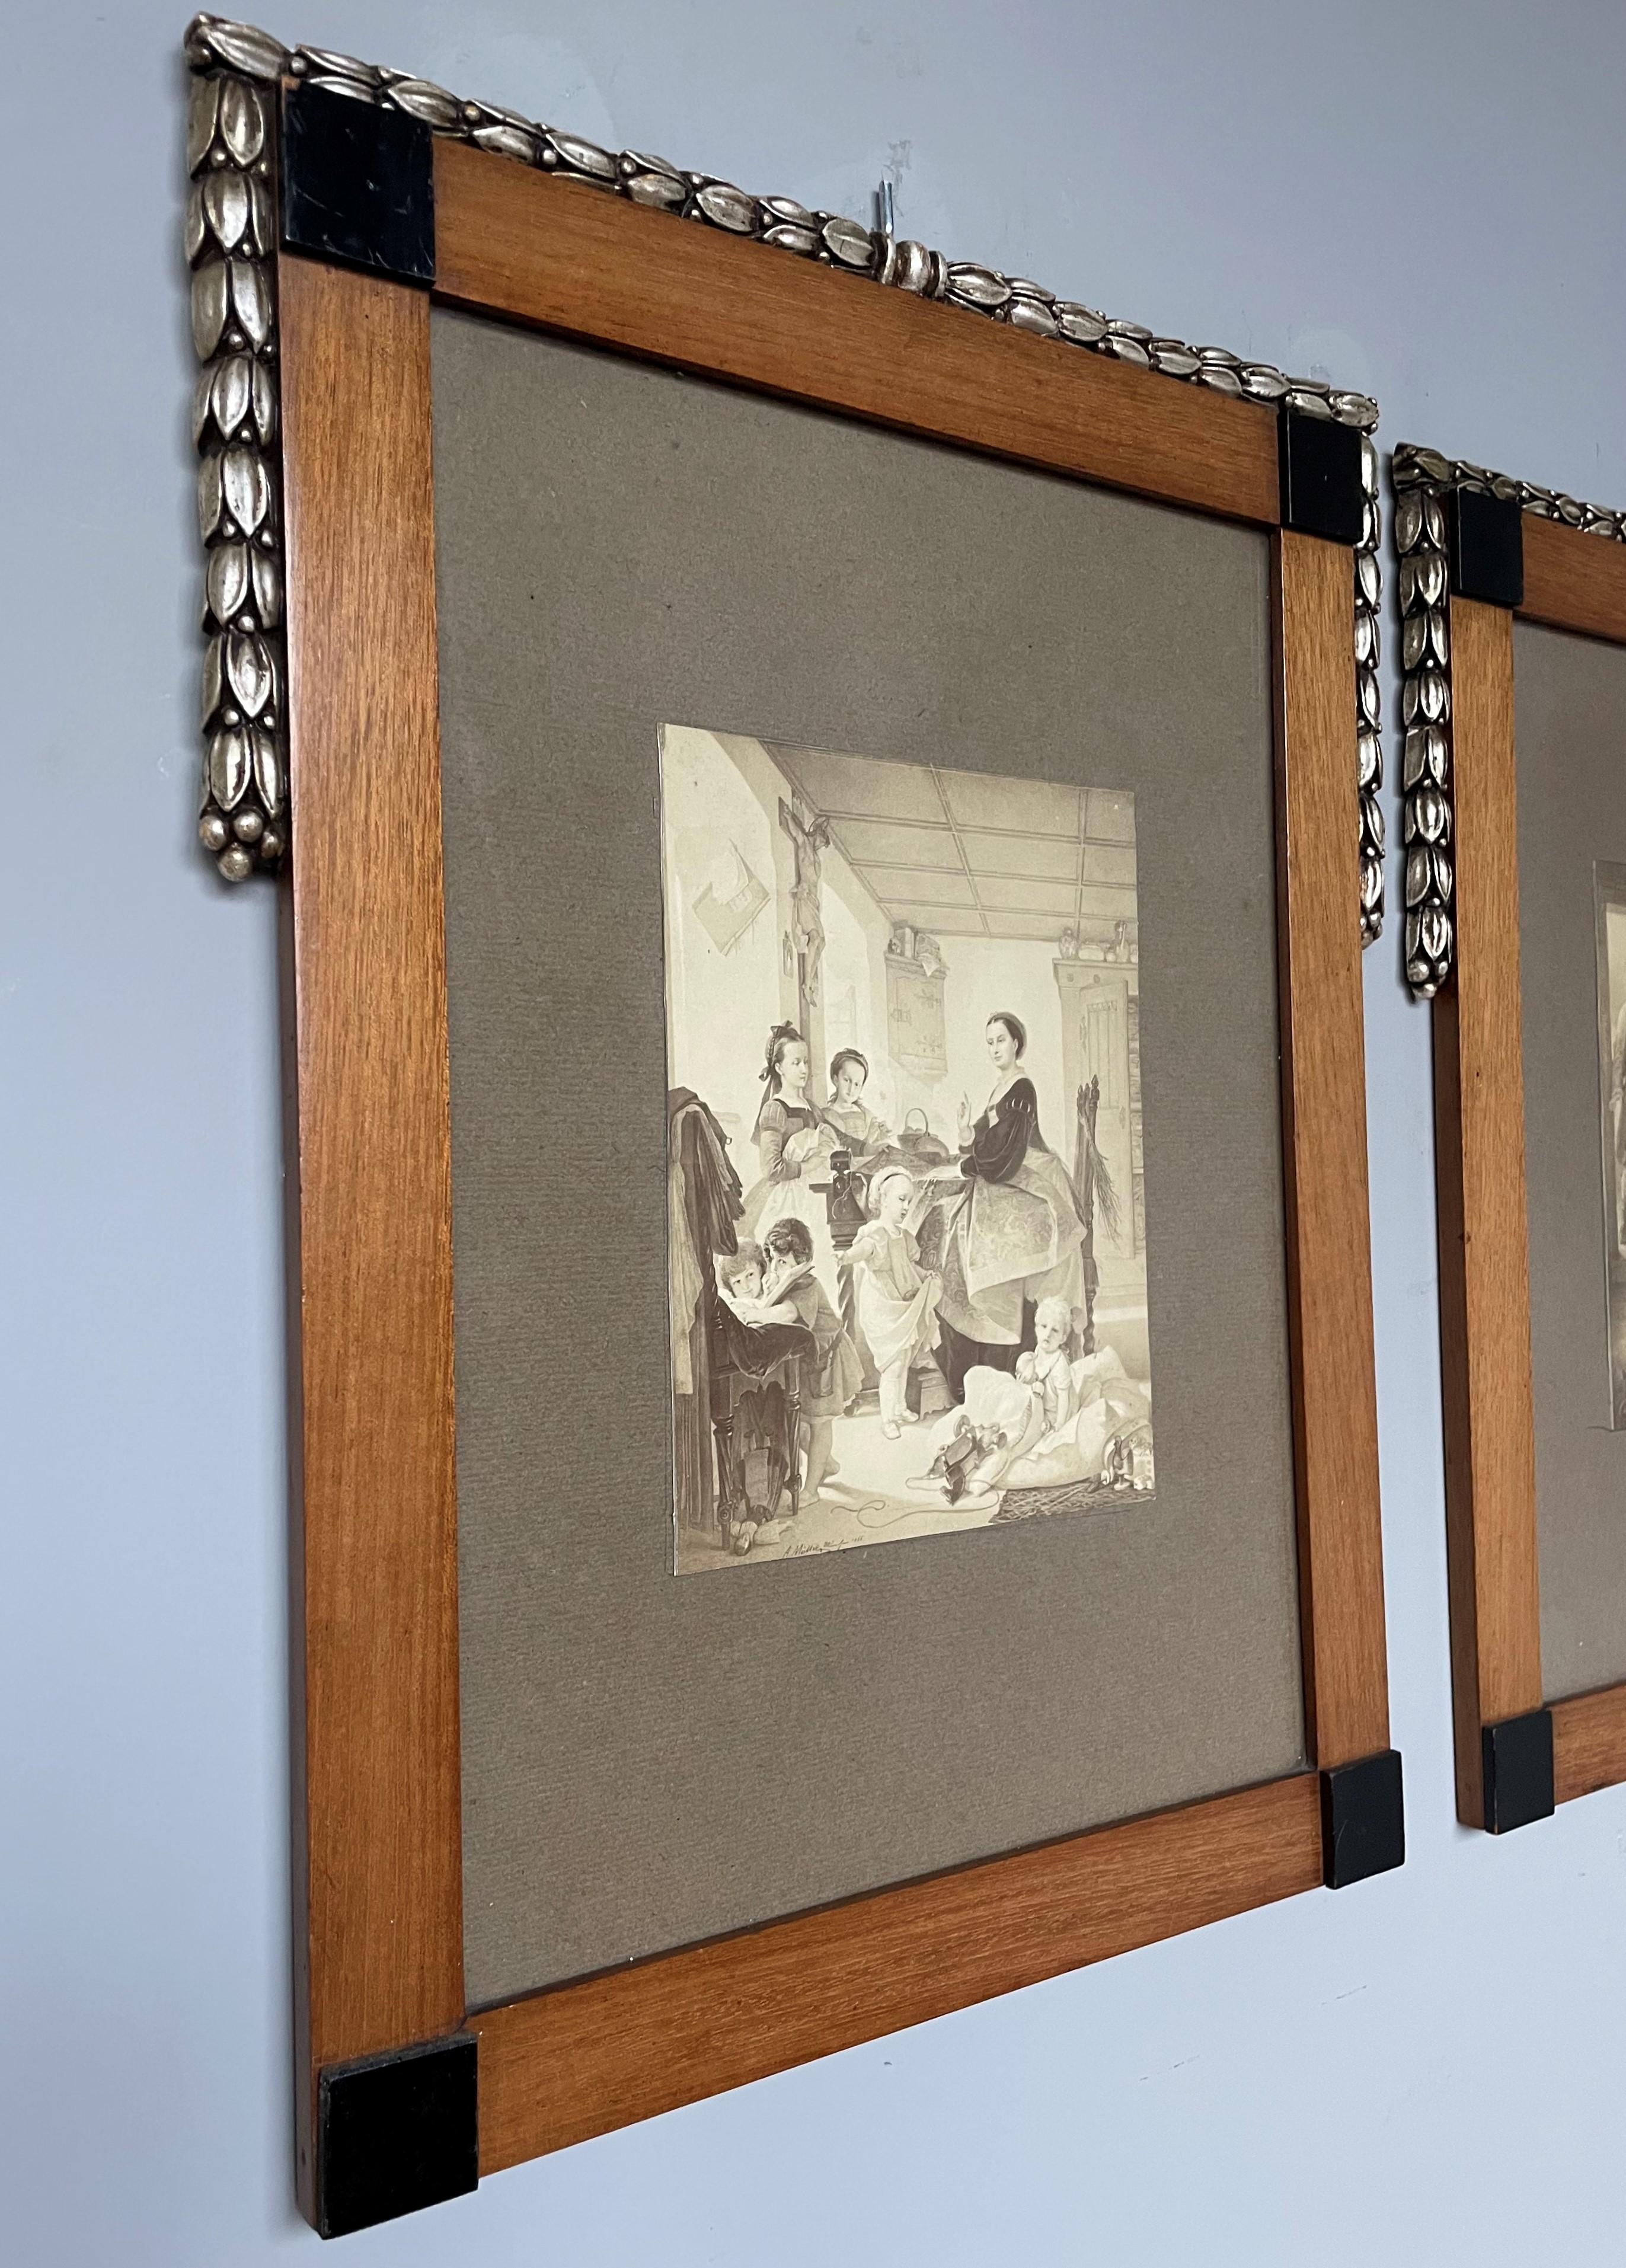 Stylish and perfectly handcrafted pair of classical Art Deco picture or photo frames.

If you are looking for the perfect picture frames for a pair of photos of your children or of you and your wife or husband then this early 1900s pair could be